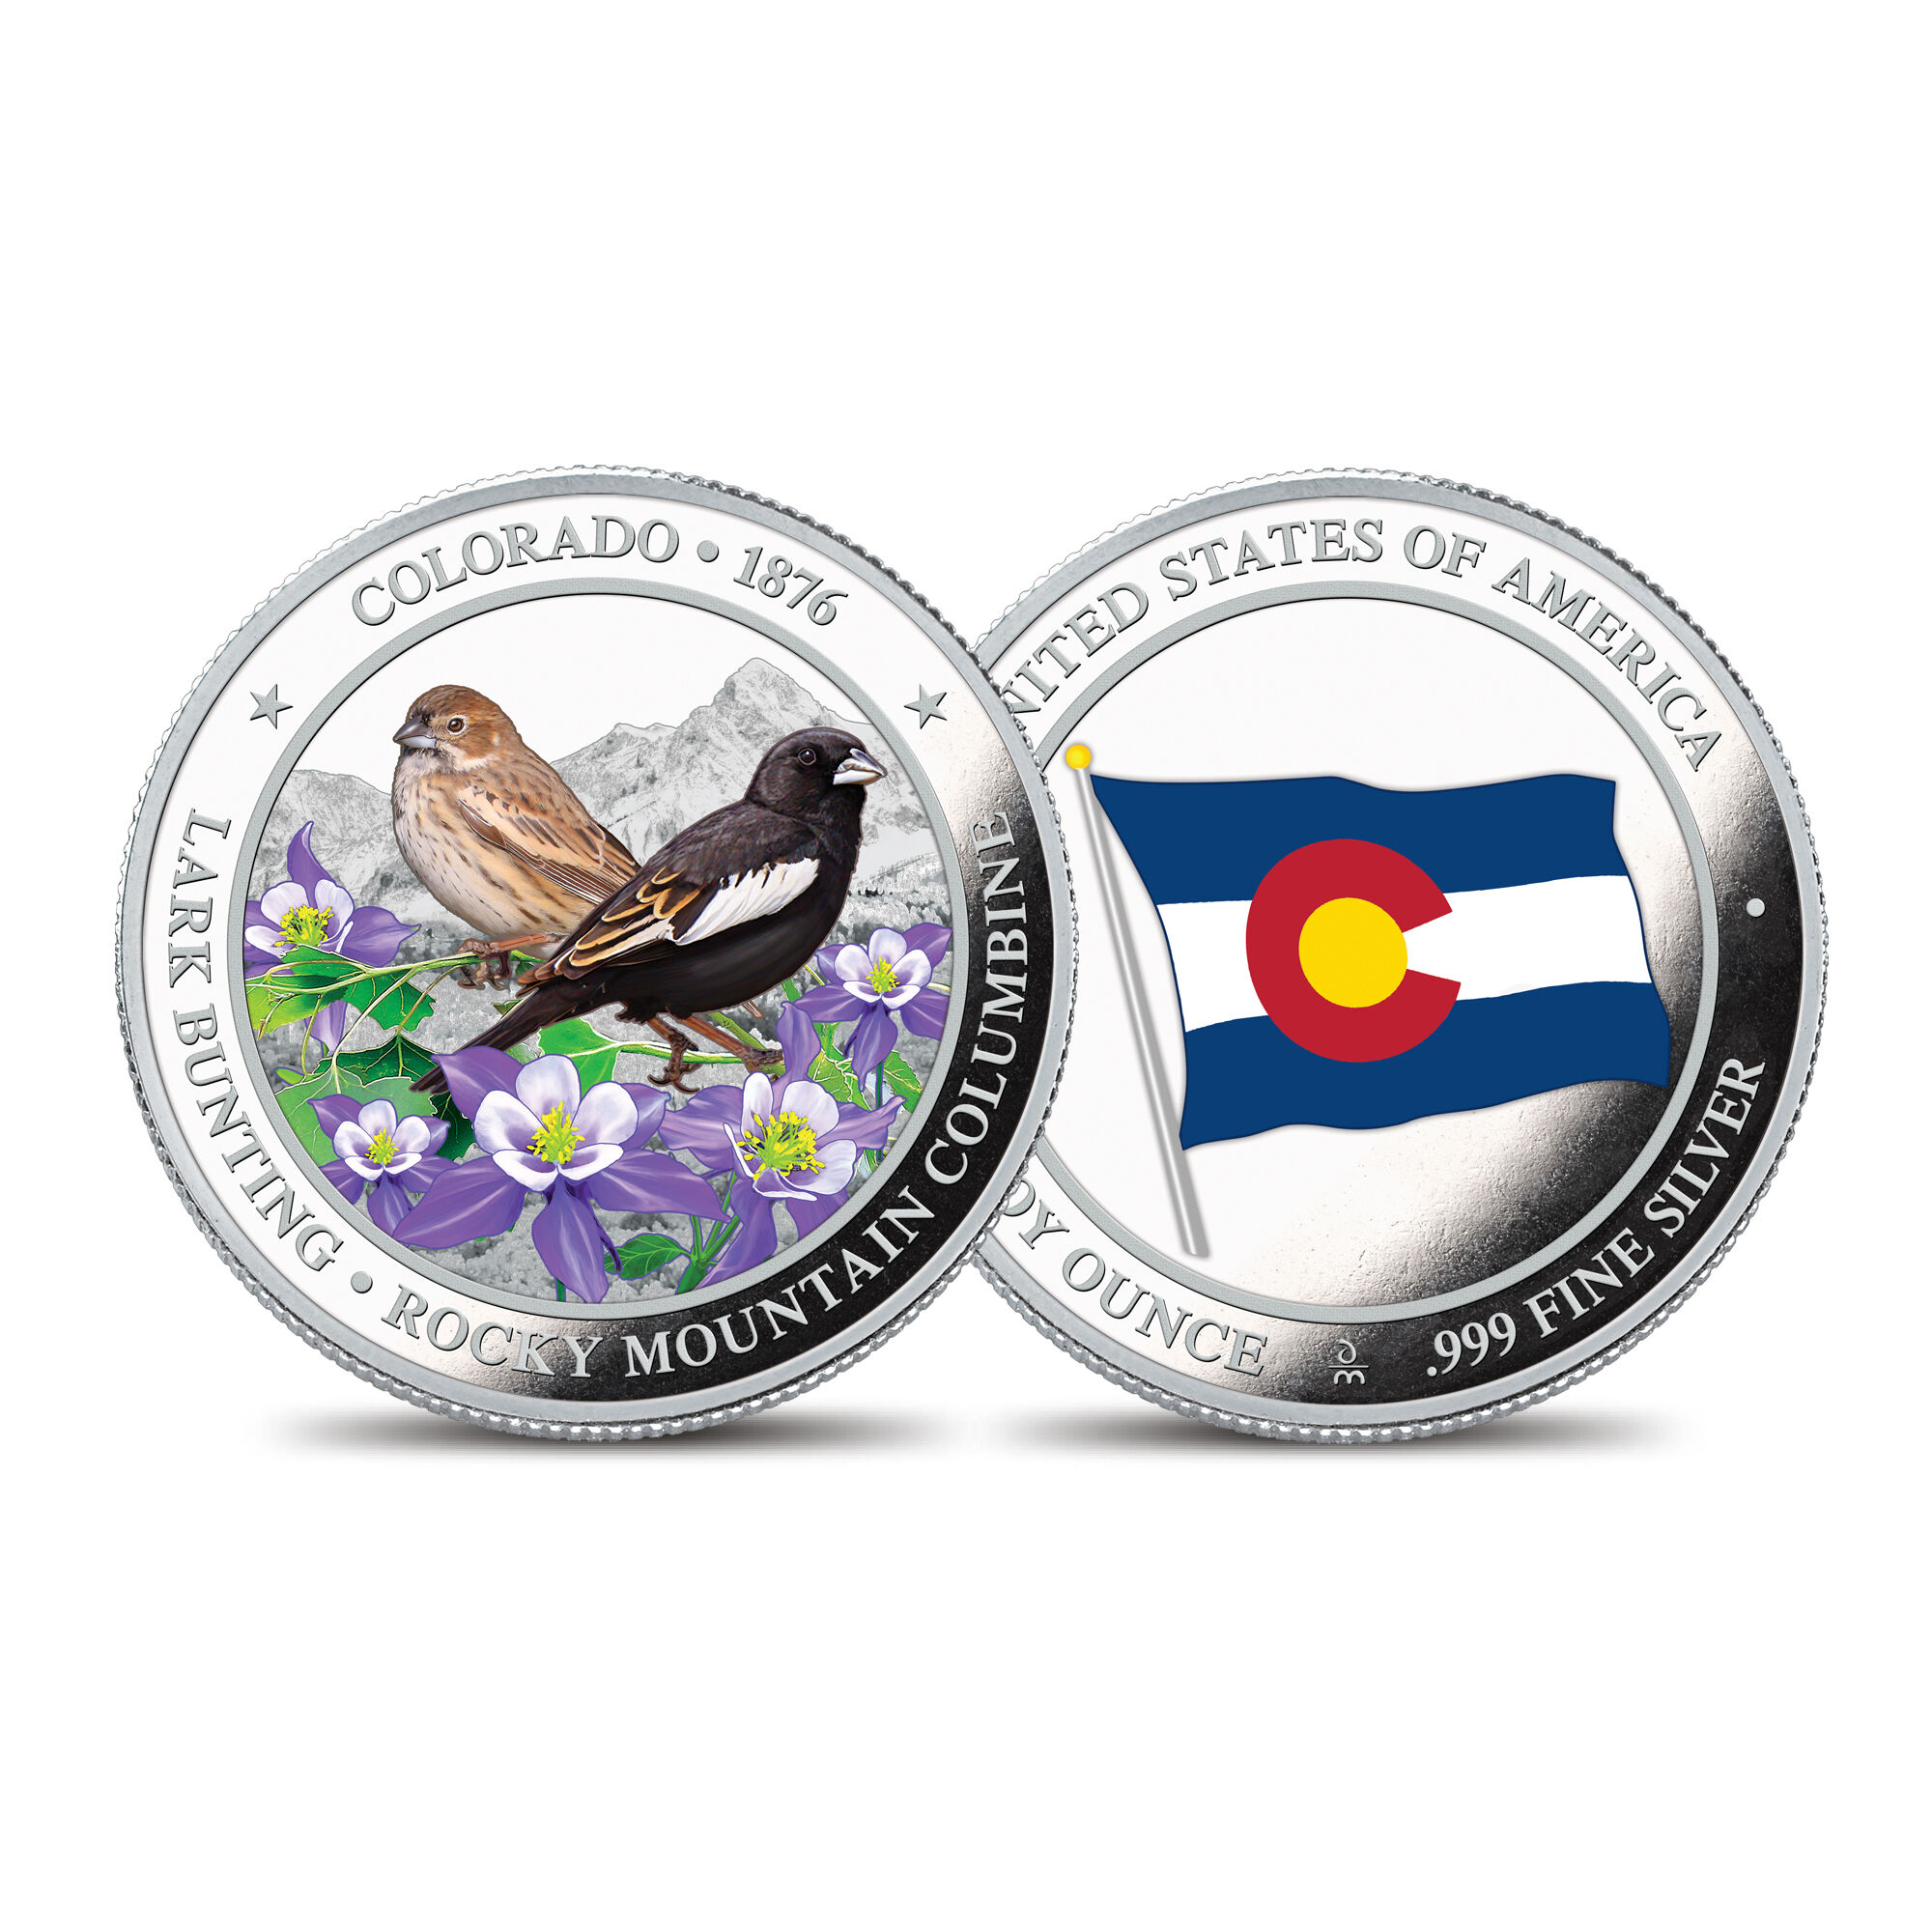 The State Bird and Flower Silver Commemoratives 2167 0088 a commemorativeCO